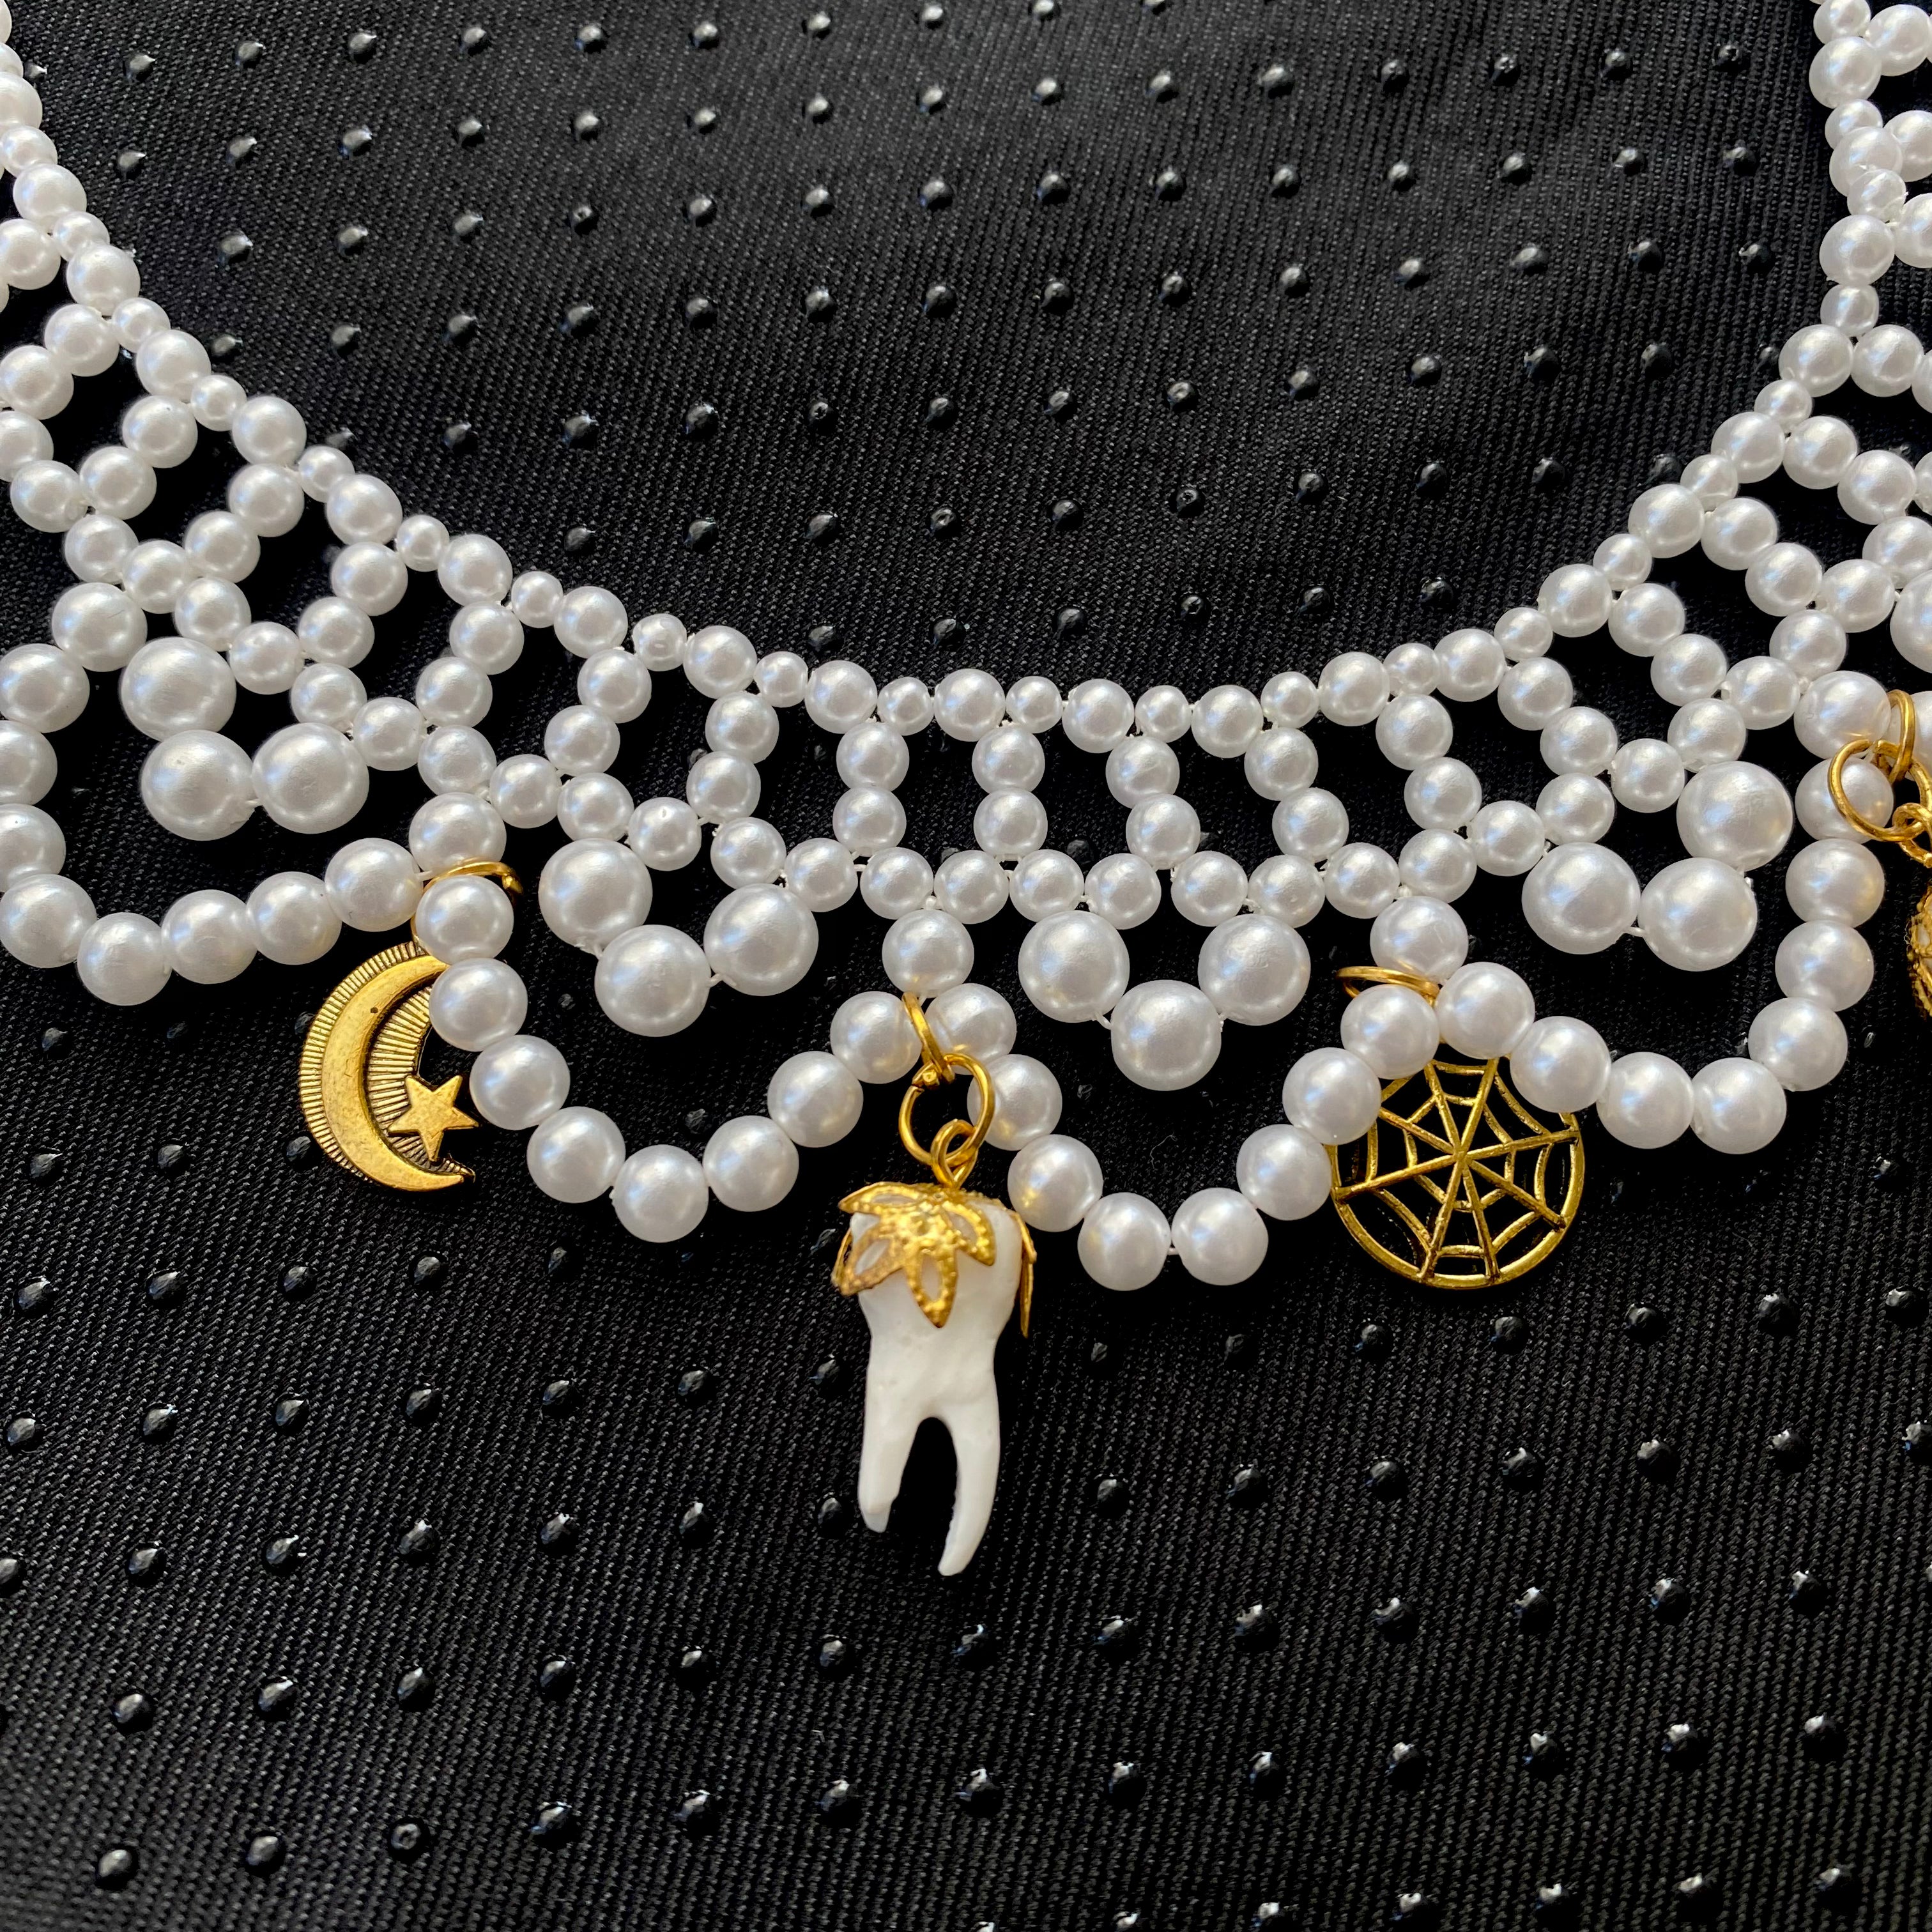 Pearl Necklace With Charms and Teeth